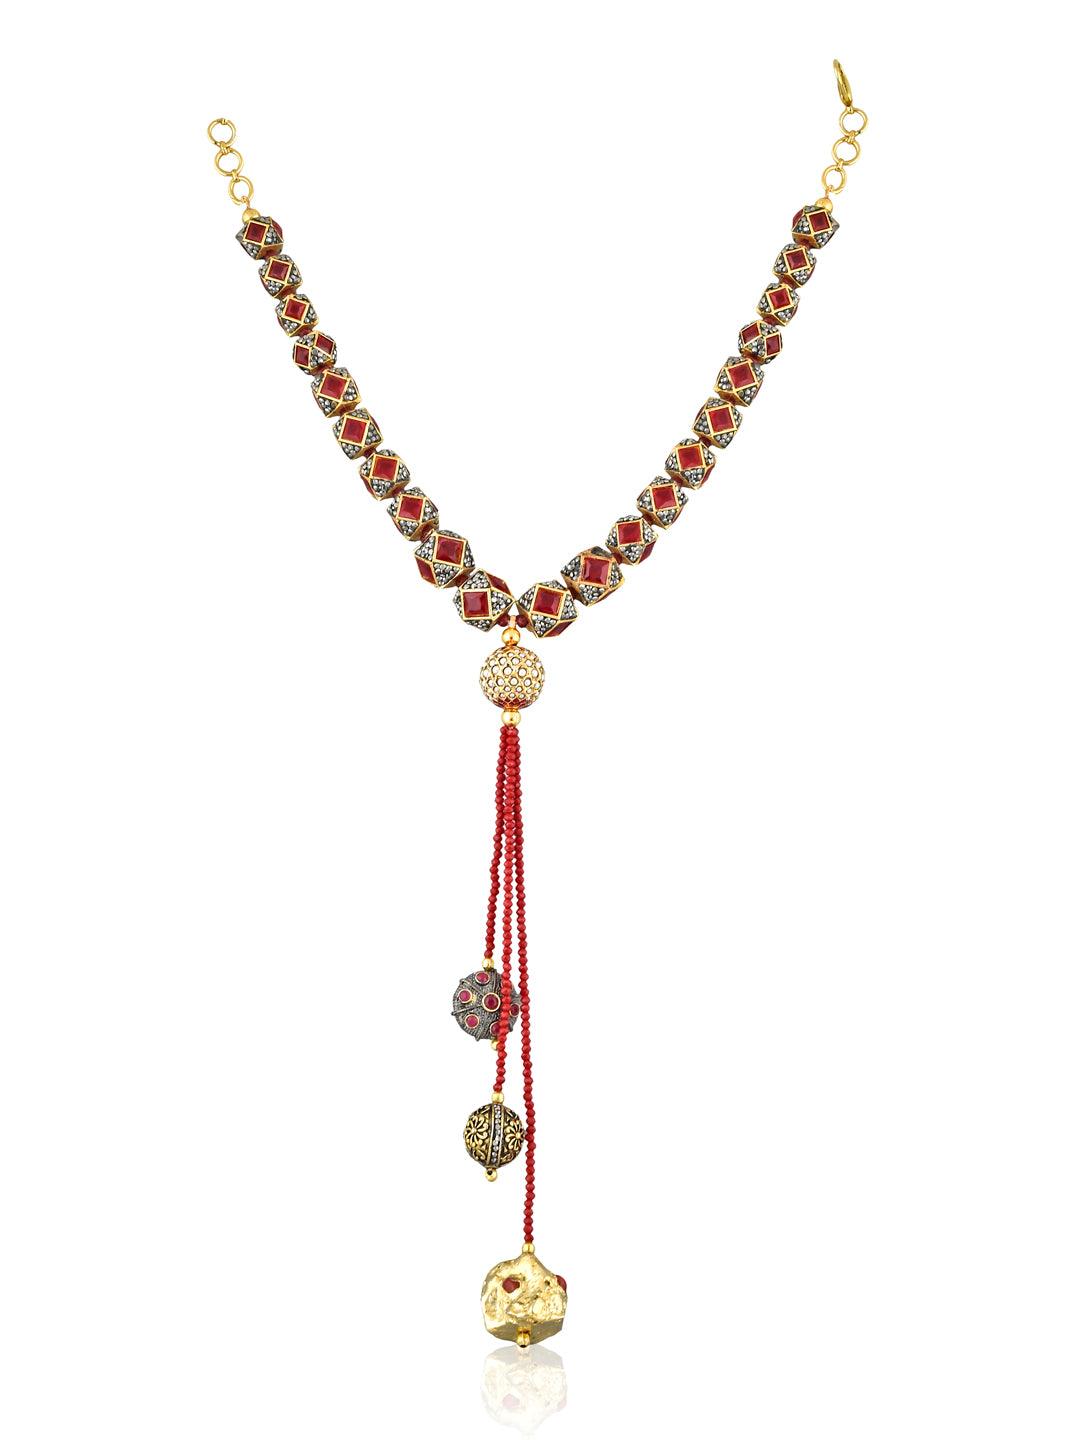 Stone Appeal Deep Red Ethnic Beads Tassel Necklace - Curio Cottage 